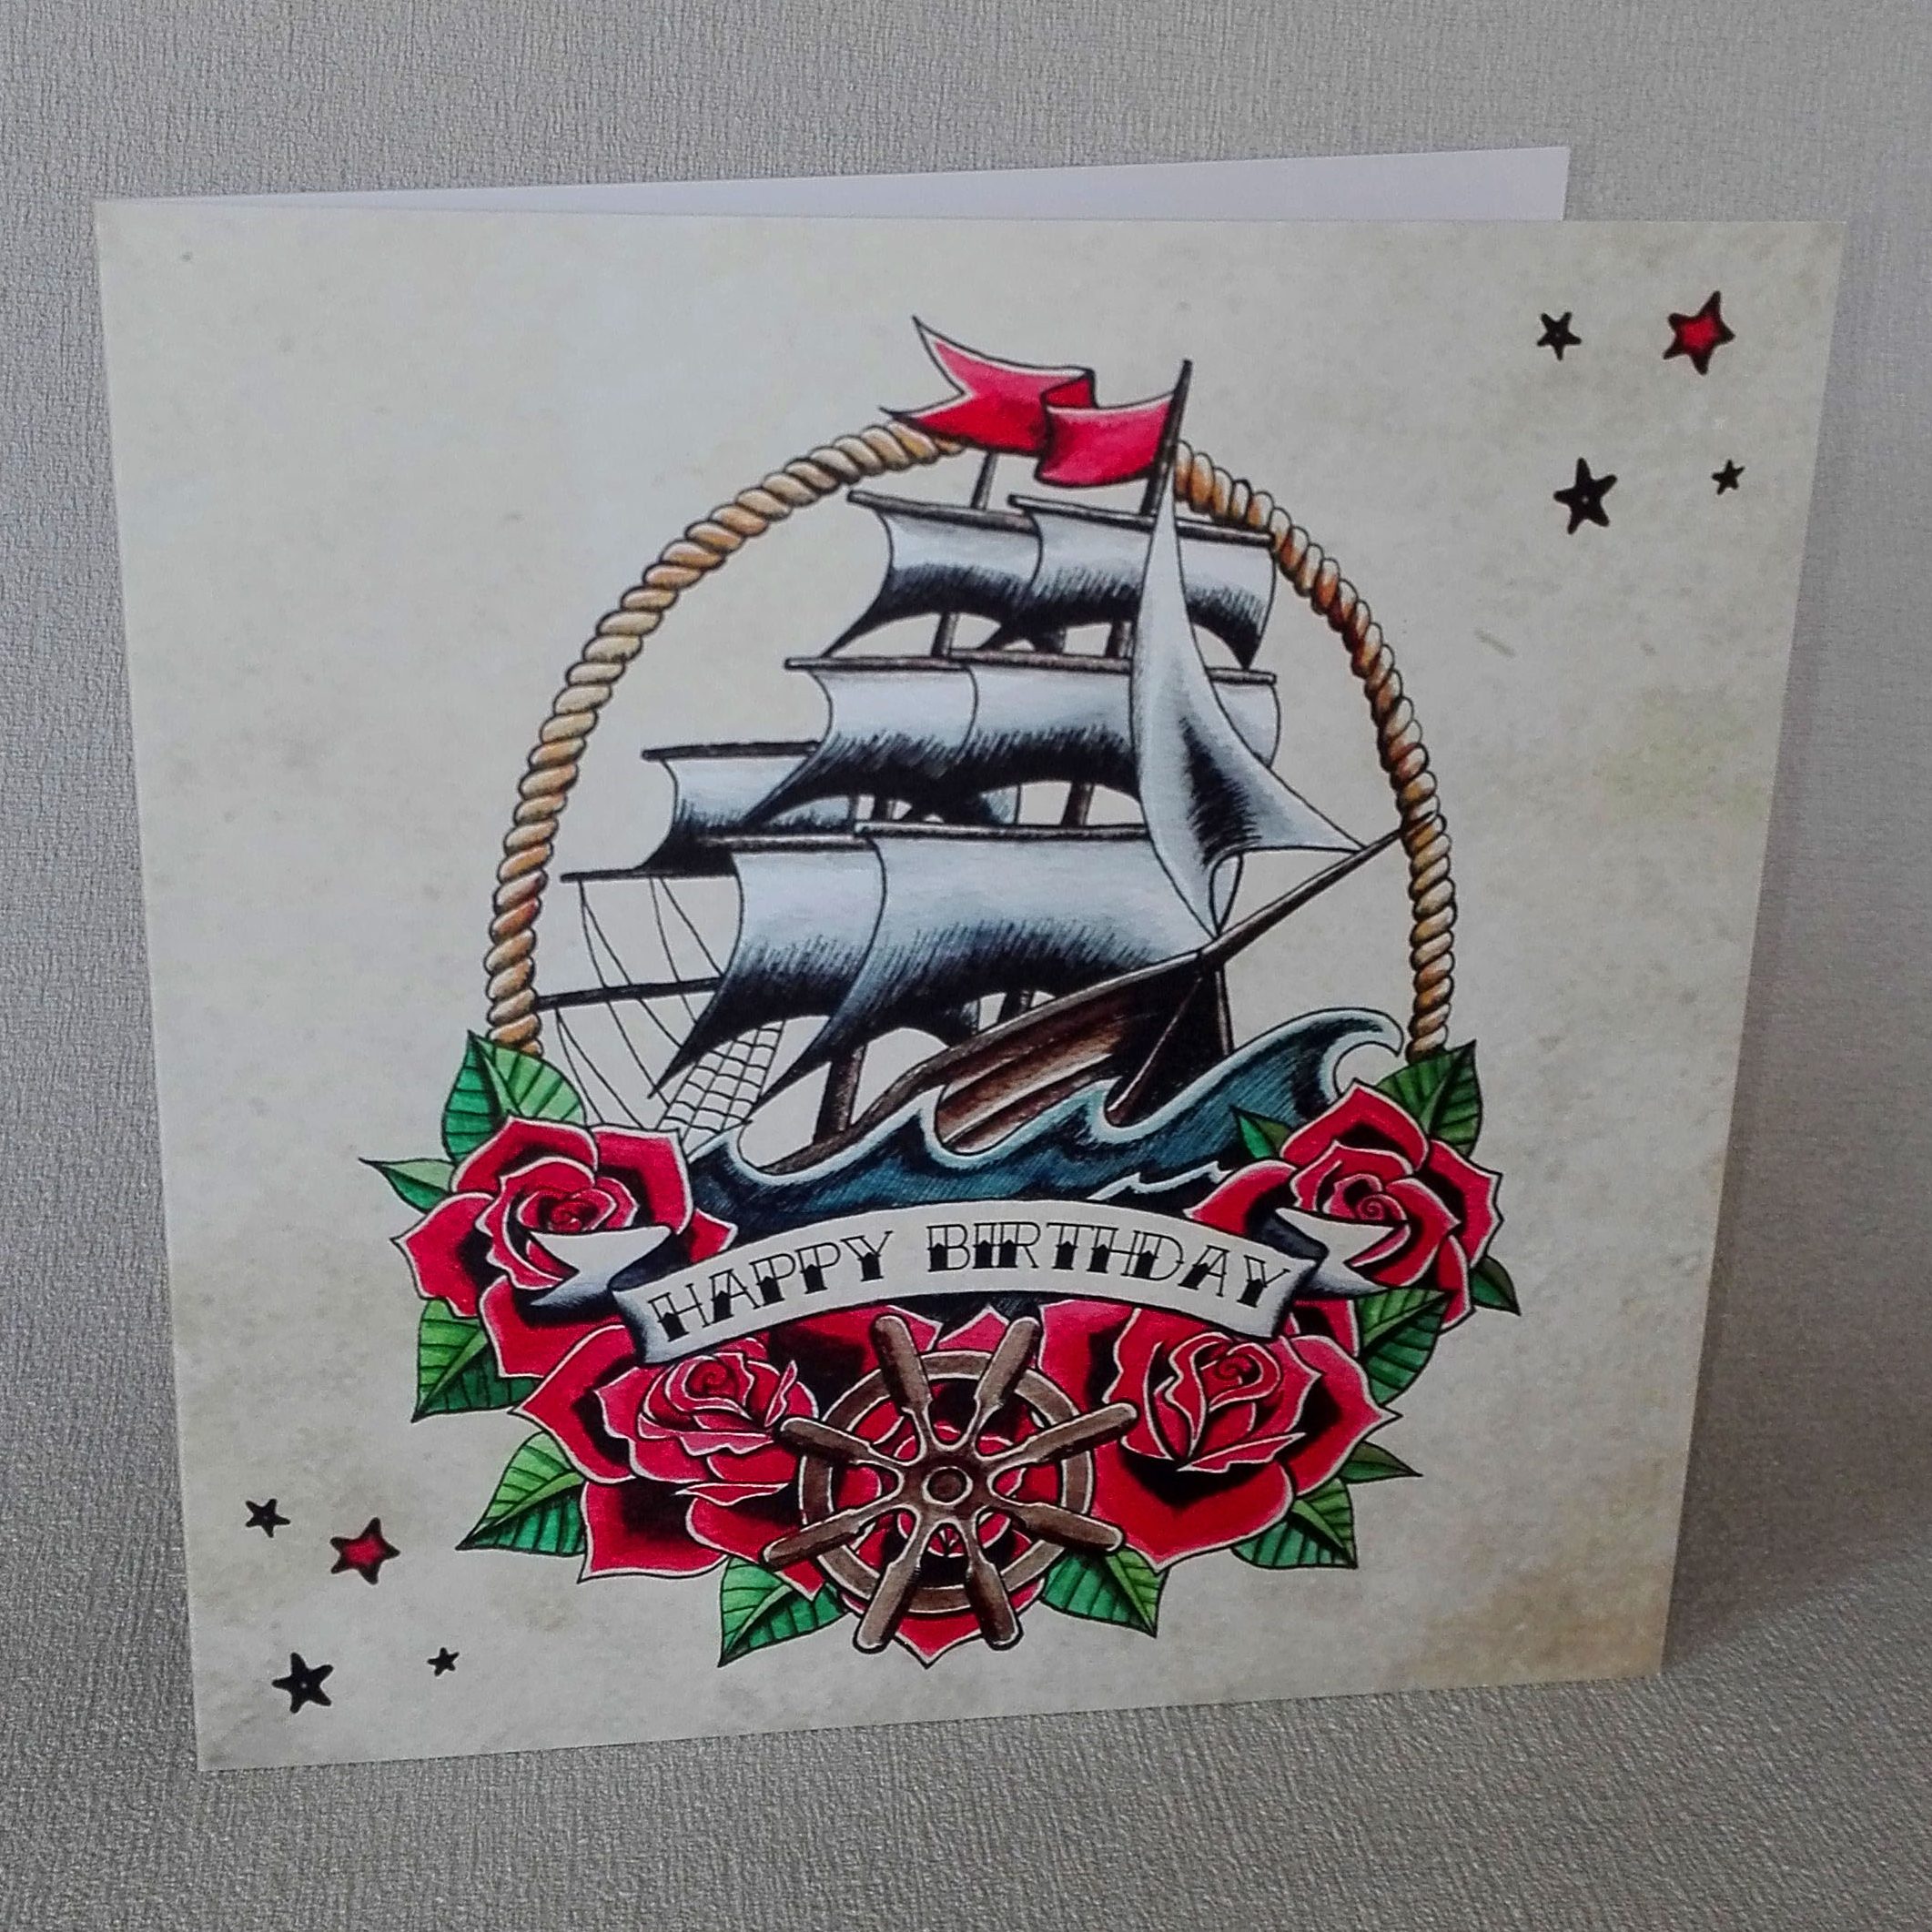 Micro-realistic sailing ship tattoo on the inner arm